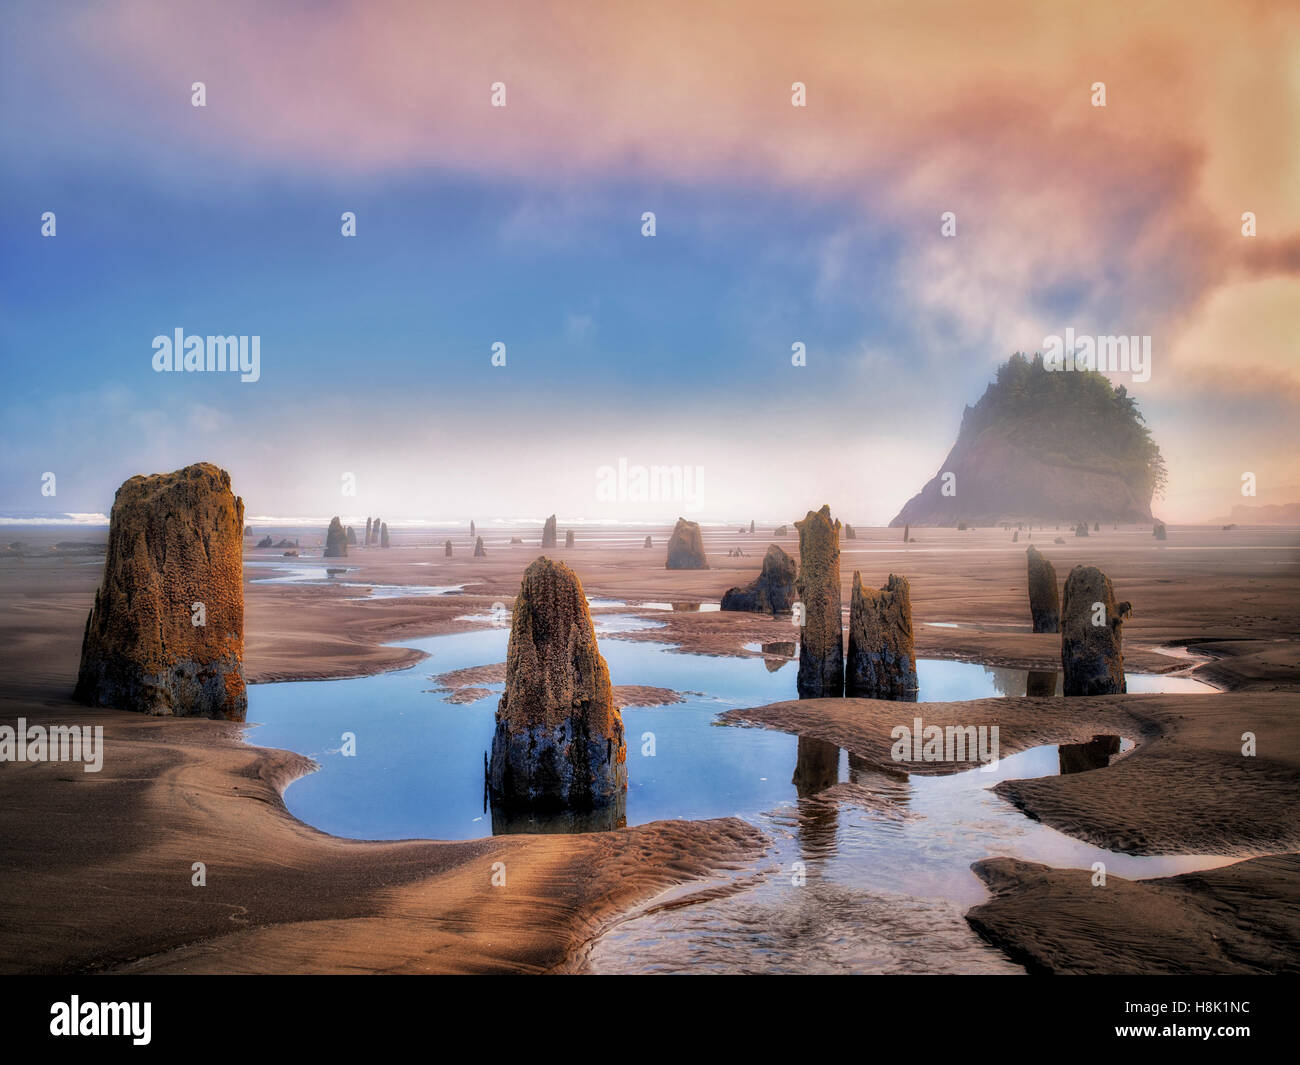 The Ghost Forest at an extreme minus tide with sunrise and fog. Neskowin, Oregon Stock Photo